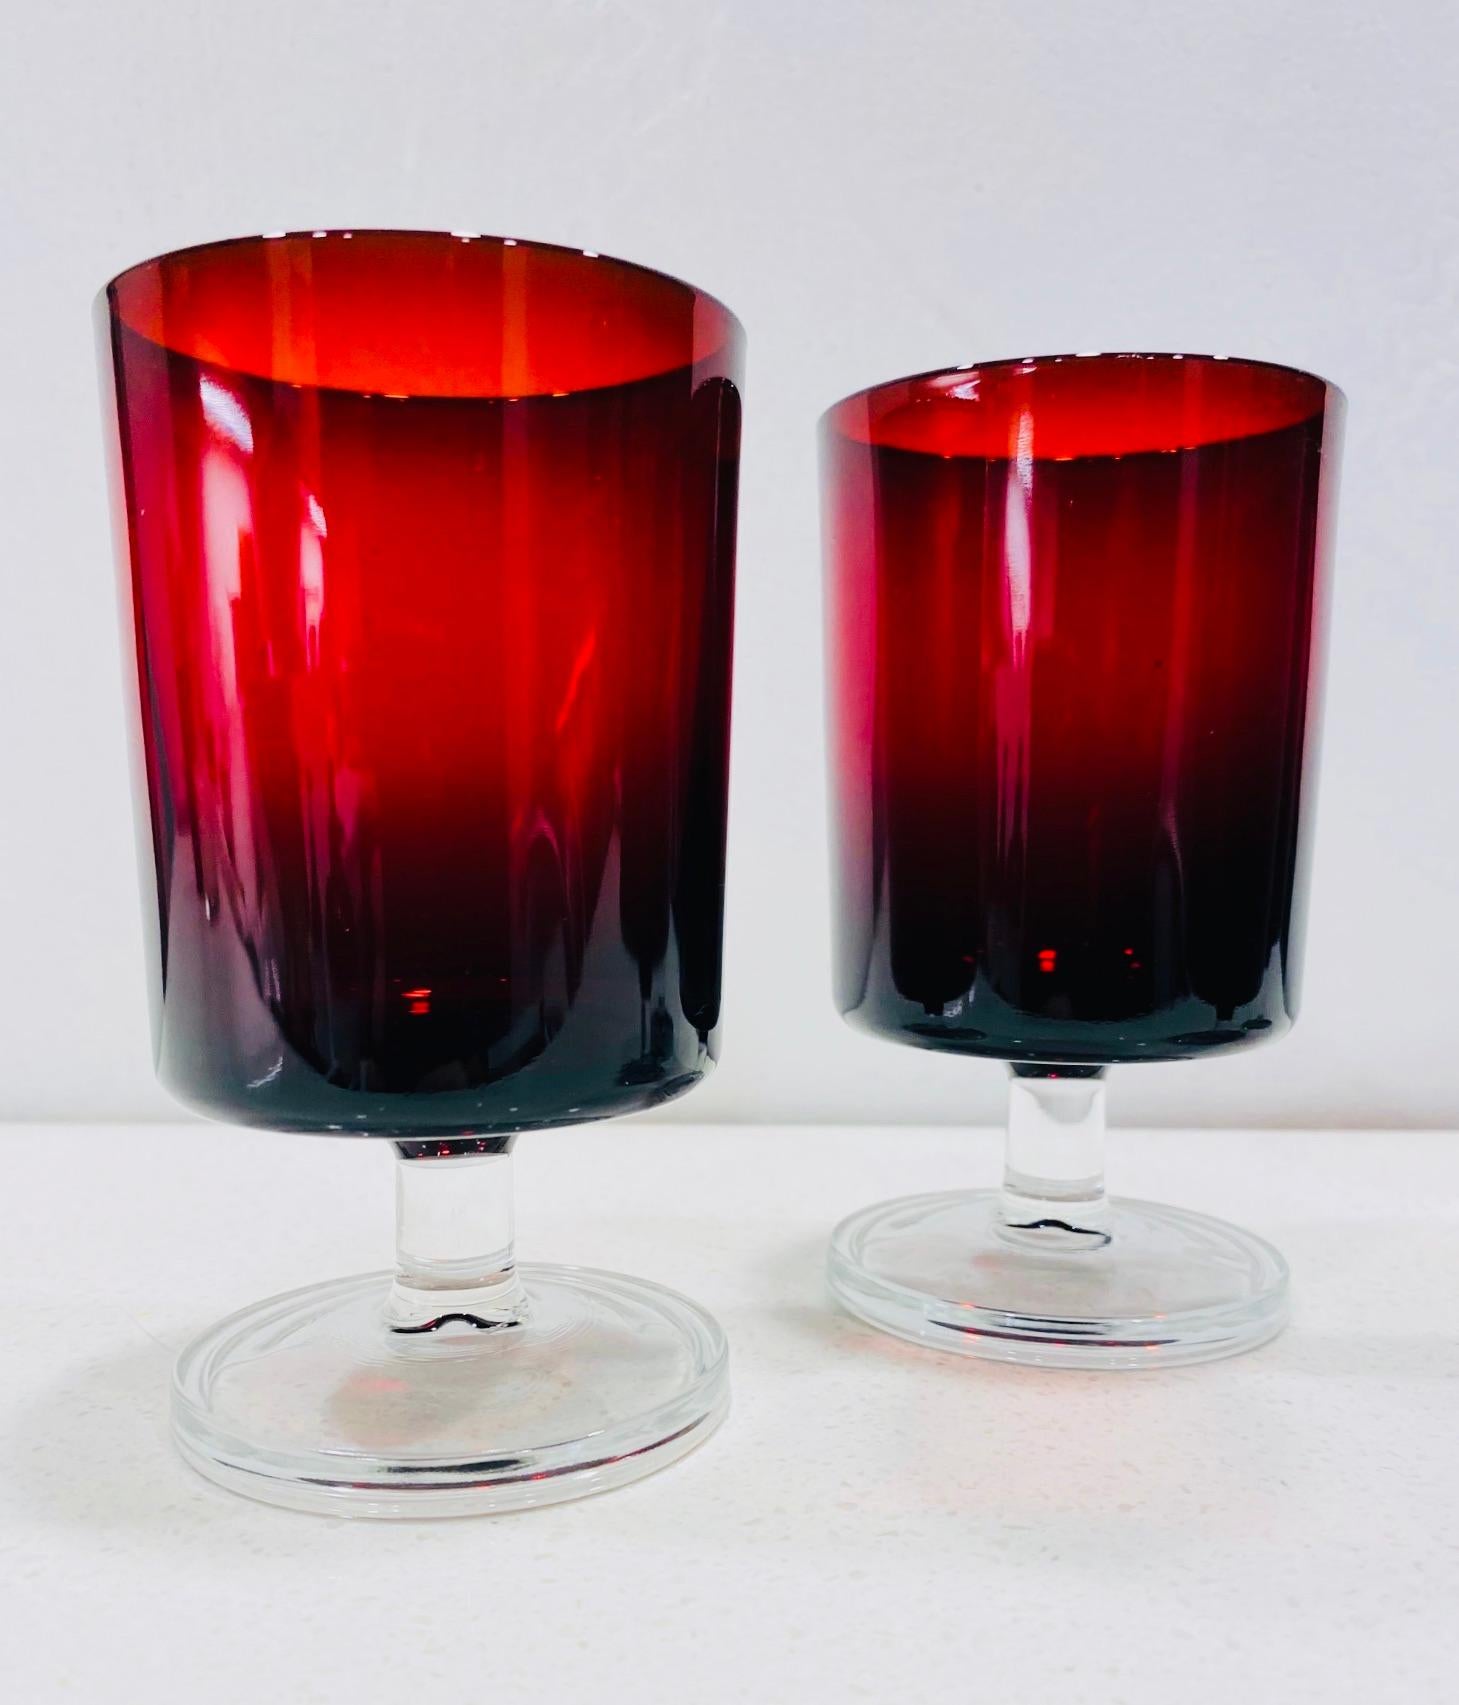 Crystal Set of Four French Vintage Stemware Glasses in Ruby Red, c. 1960s